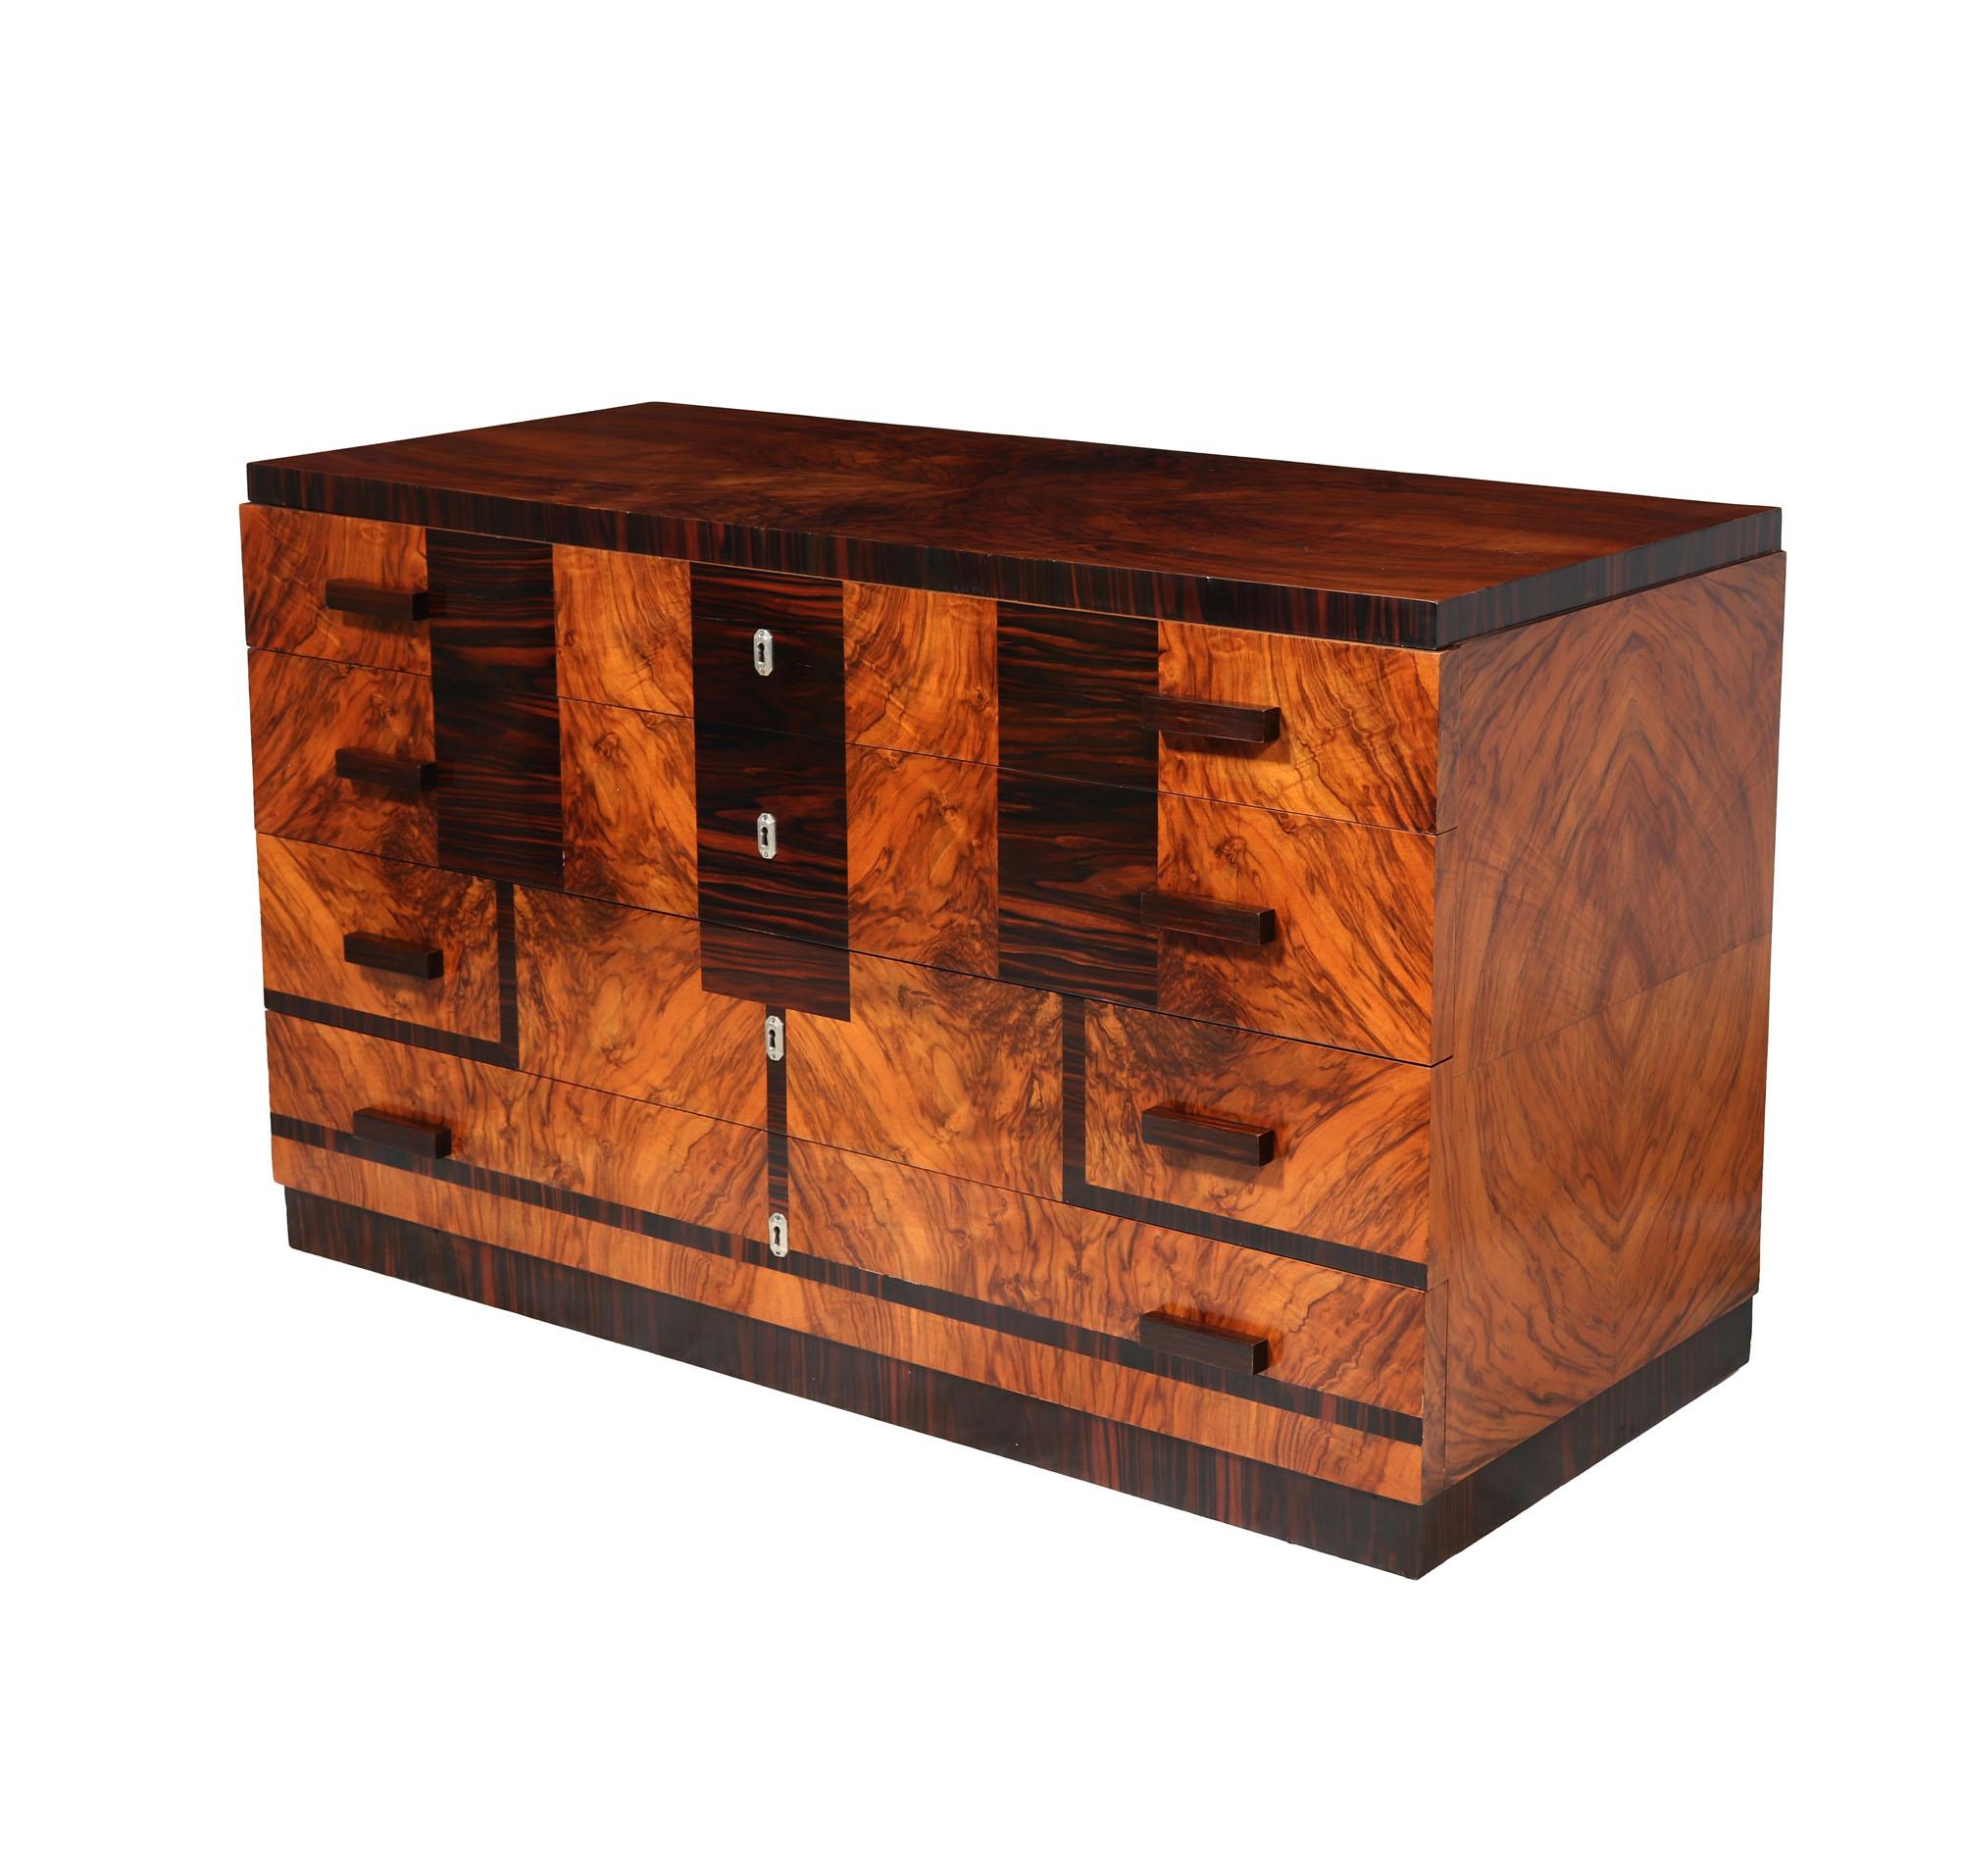 ITALIAN ART DECO COMMODE
This exceptional Art Deco Commode from 1930s Italy, boasting a very stylish design that combines walnut with intricate Macassar ebony inlay detailing. Its four spacious drawers are adorned with elegant chrome escutcheons and